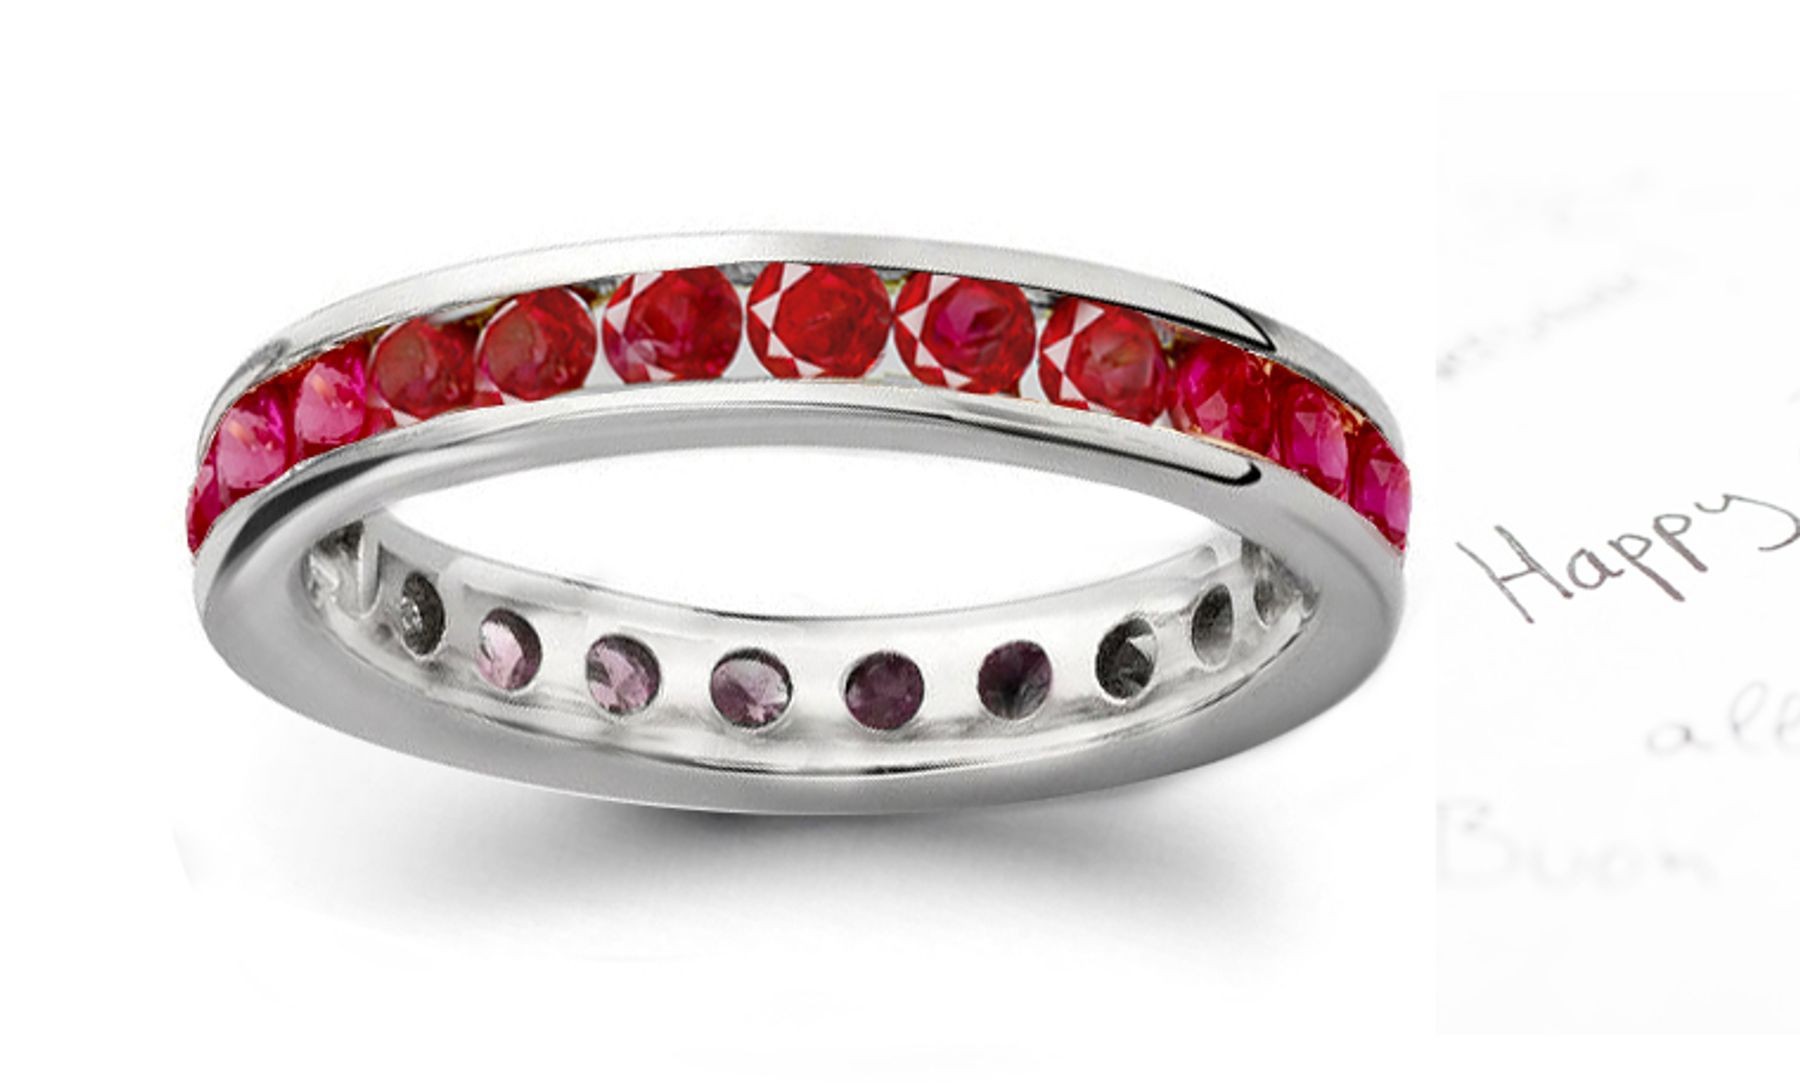 Eternity Rings: Platinum channel set round rubies eternity band